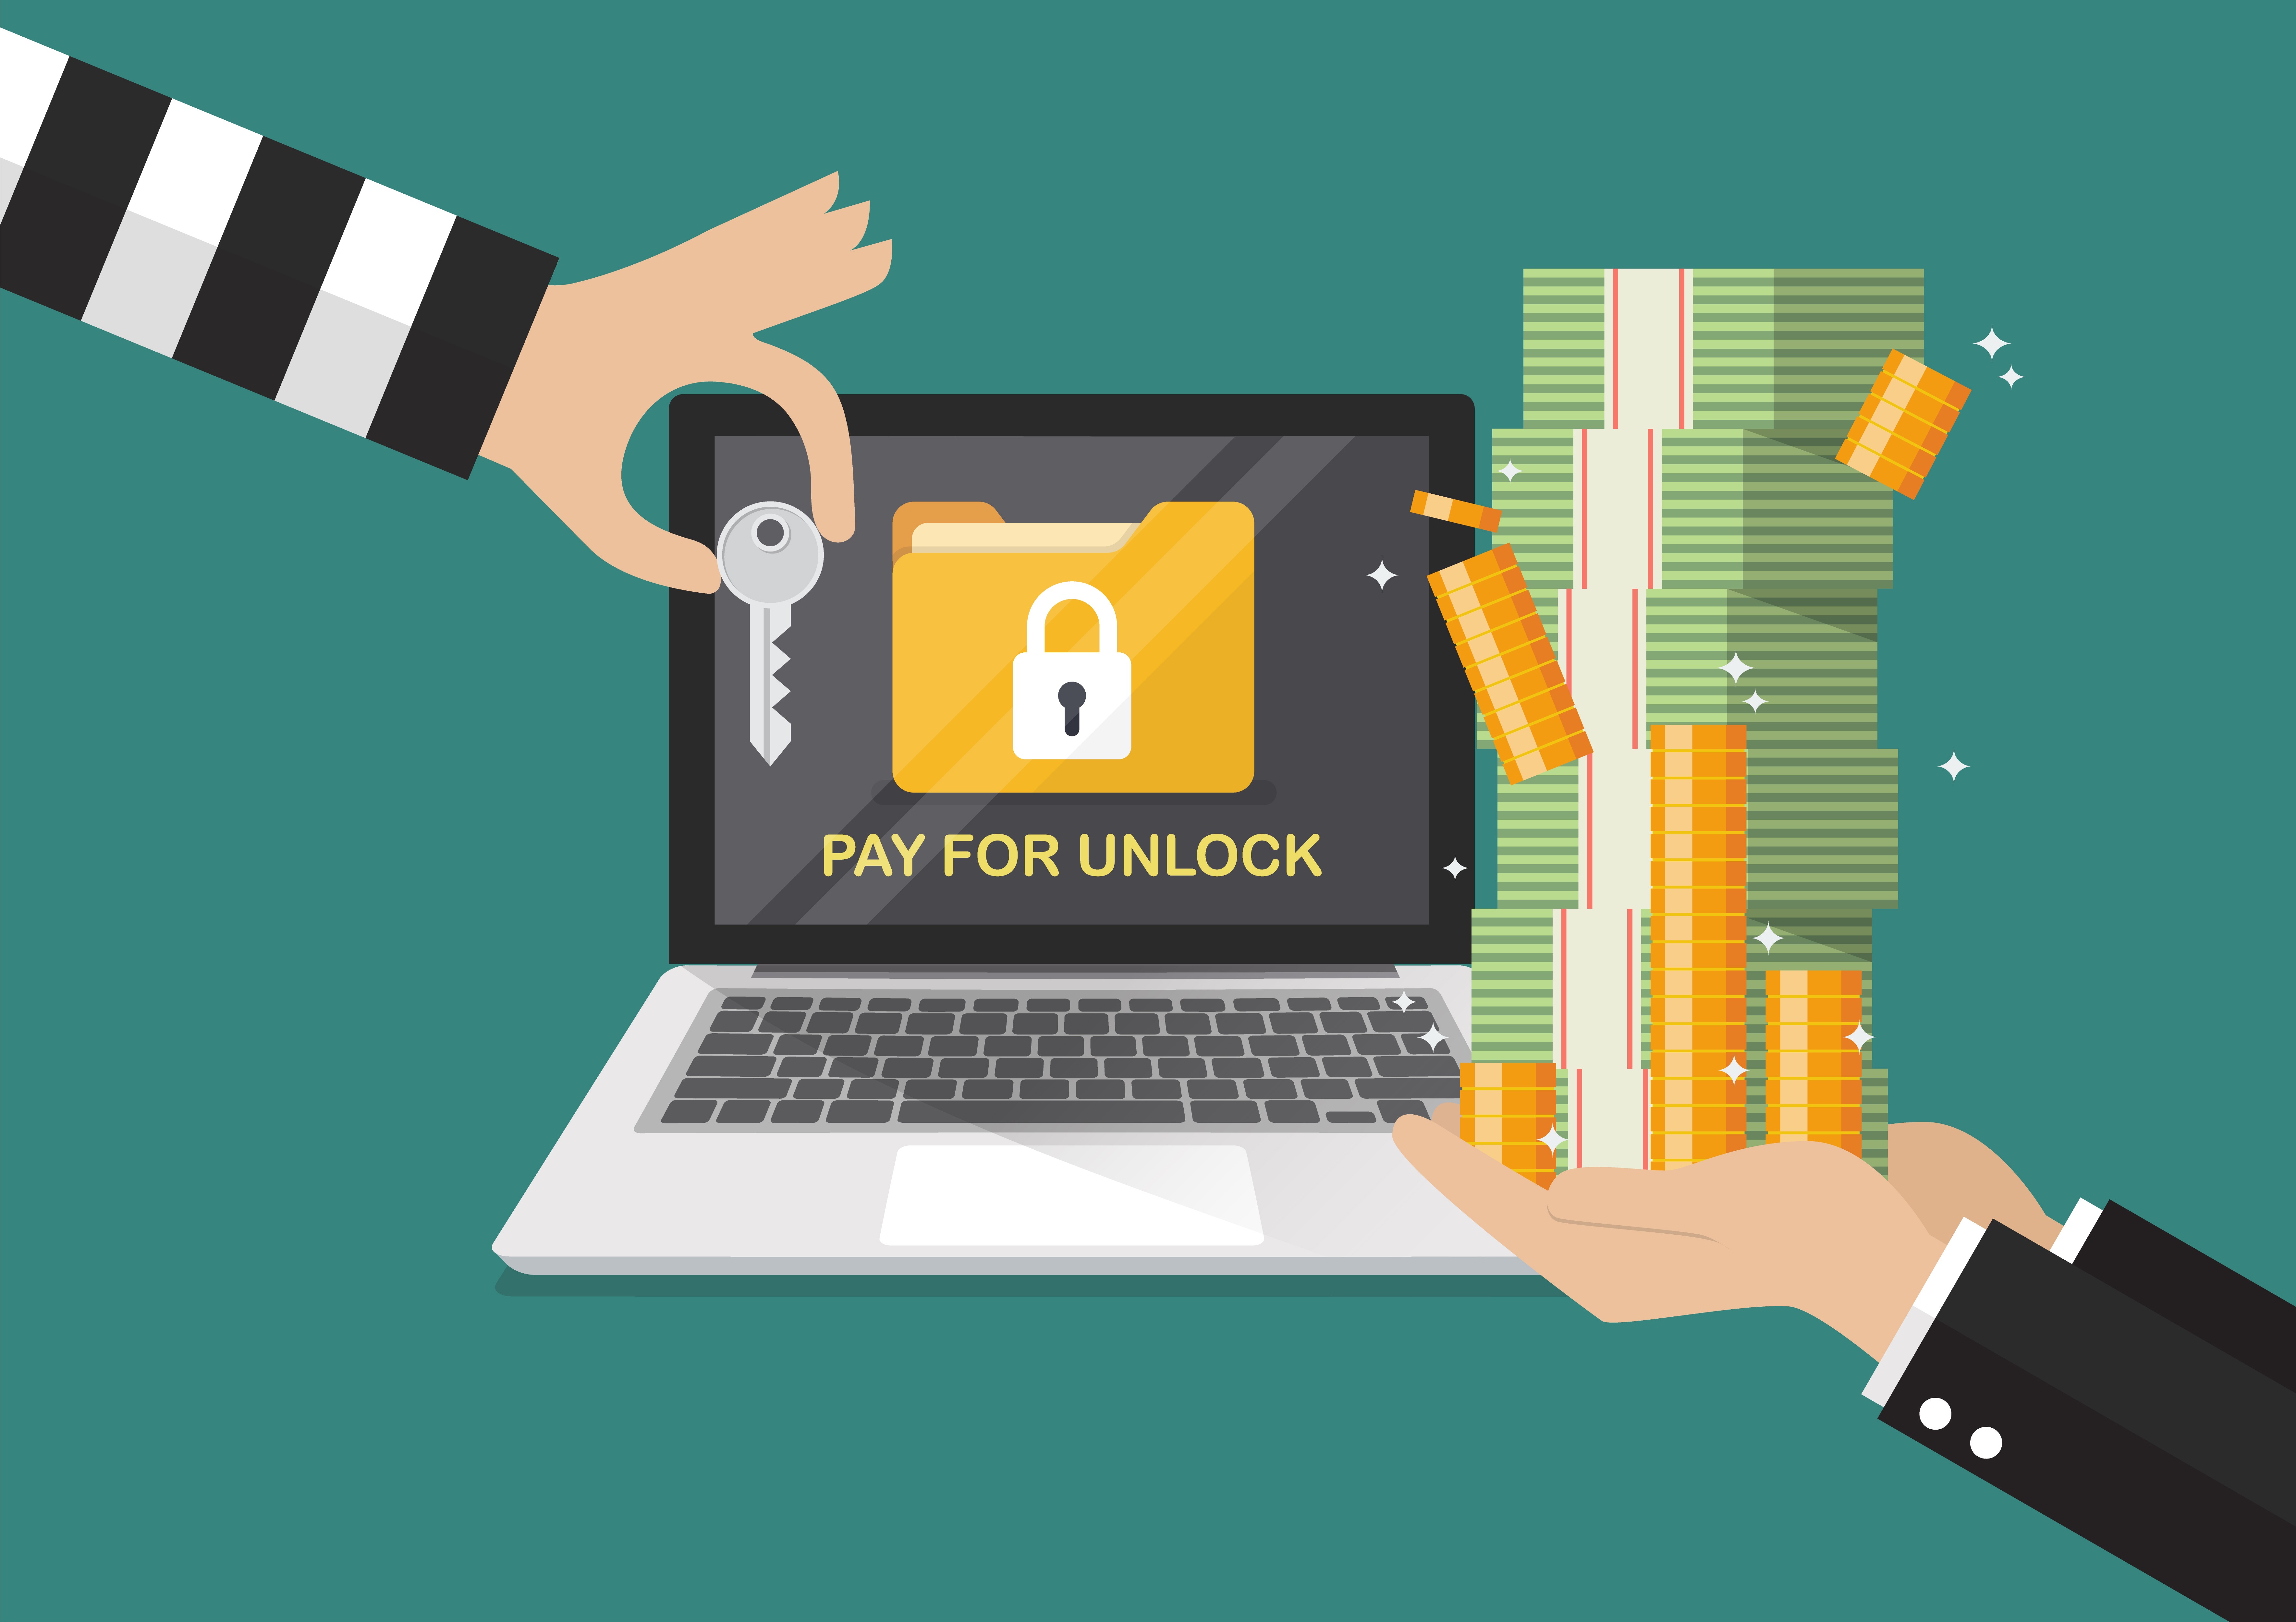 Crypto ransomware threats: a growing concern - LimeTech